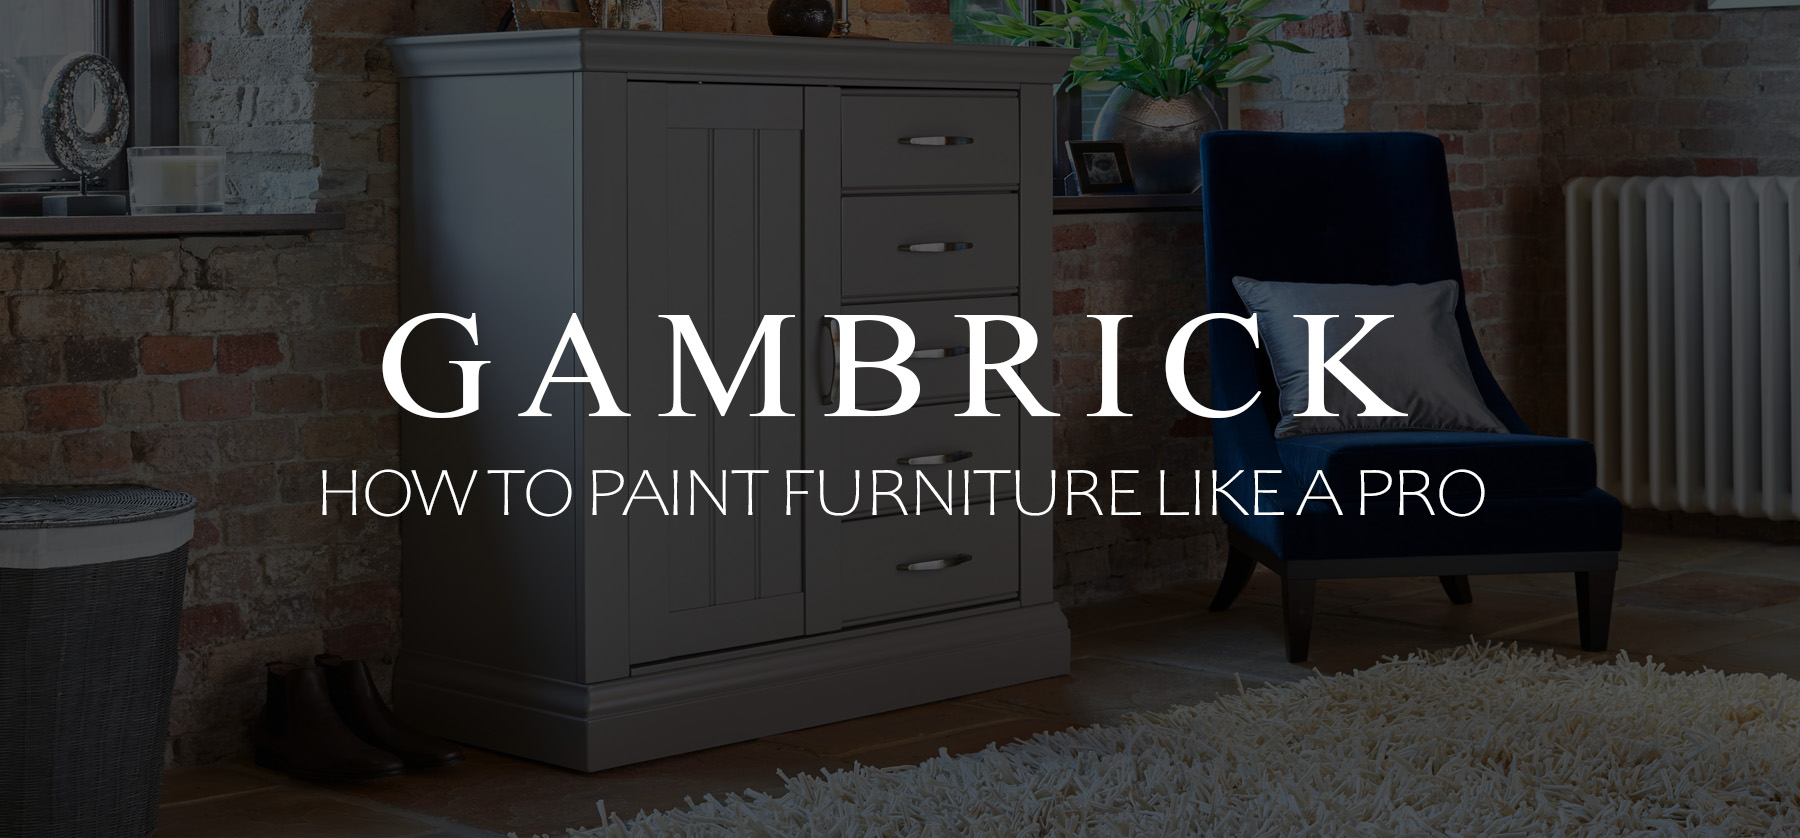 how to paint furniture like a pro banner pic